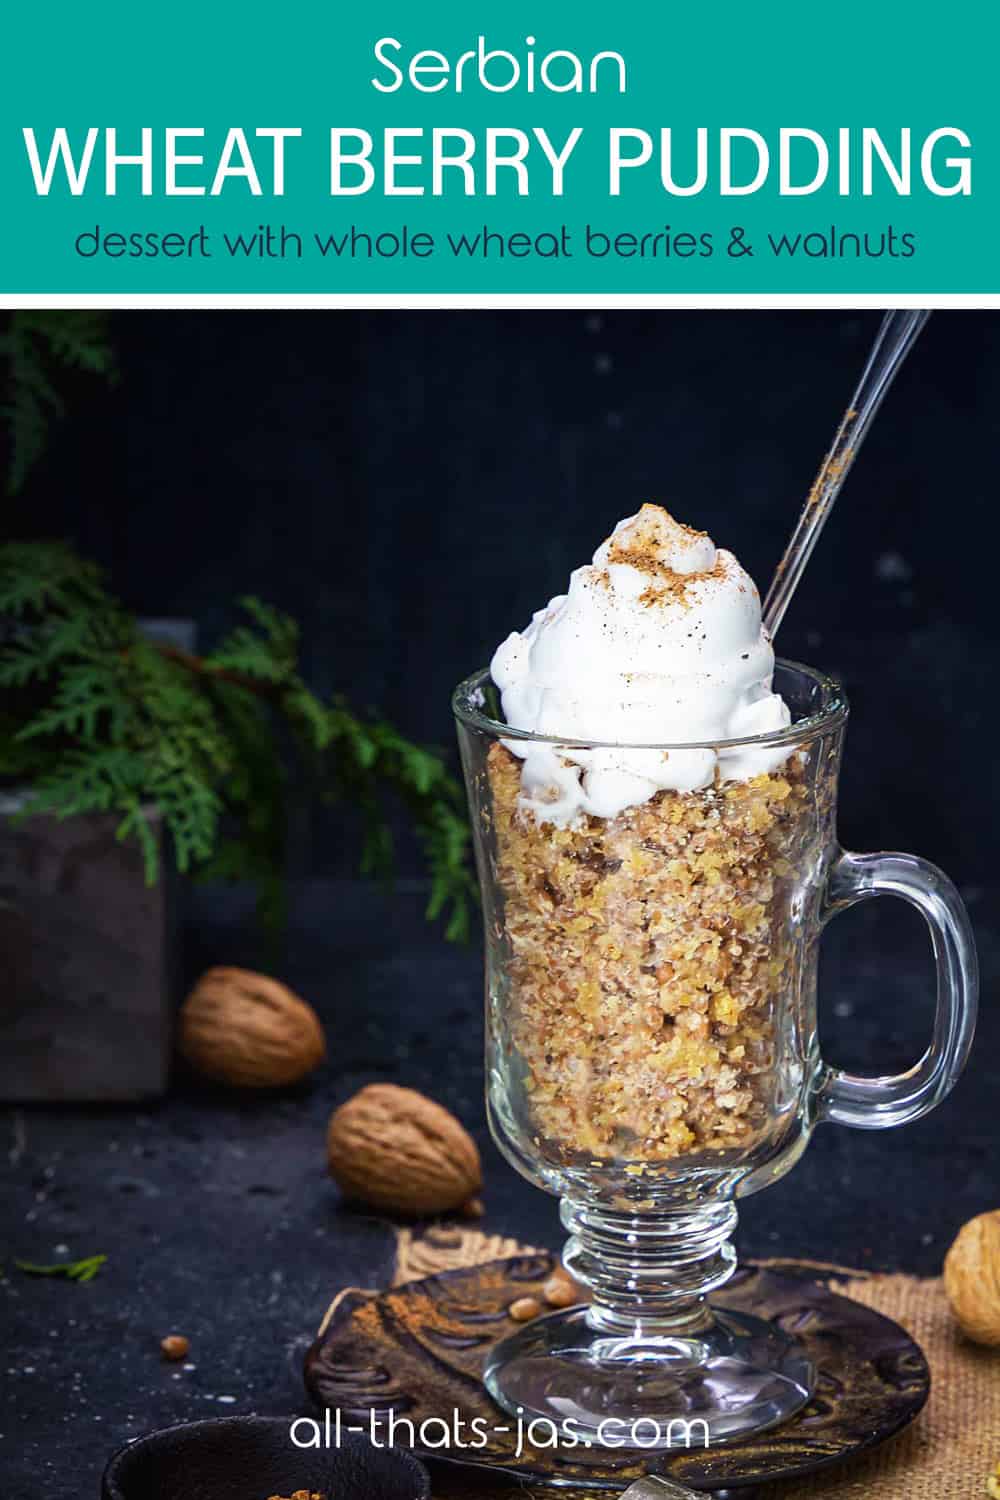 A close up of wheat berry pudding in the glass with whipped cream and text overlay.